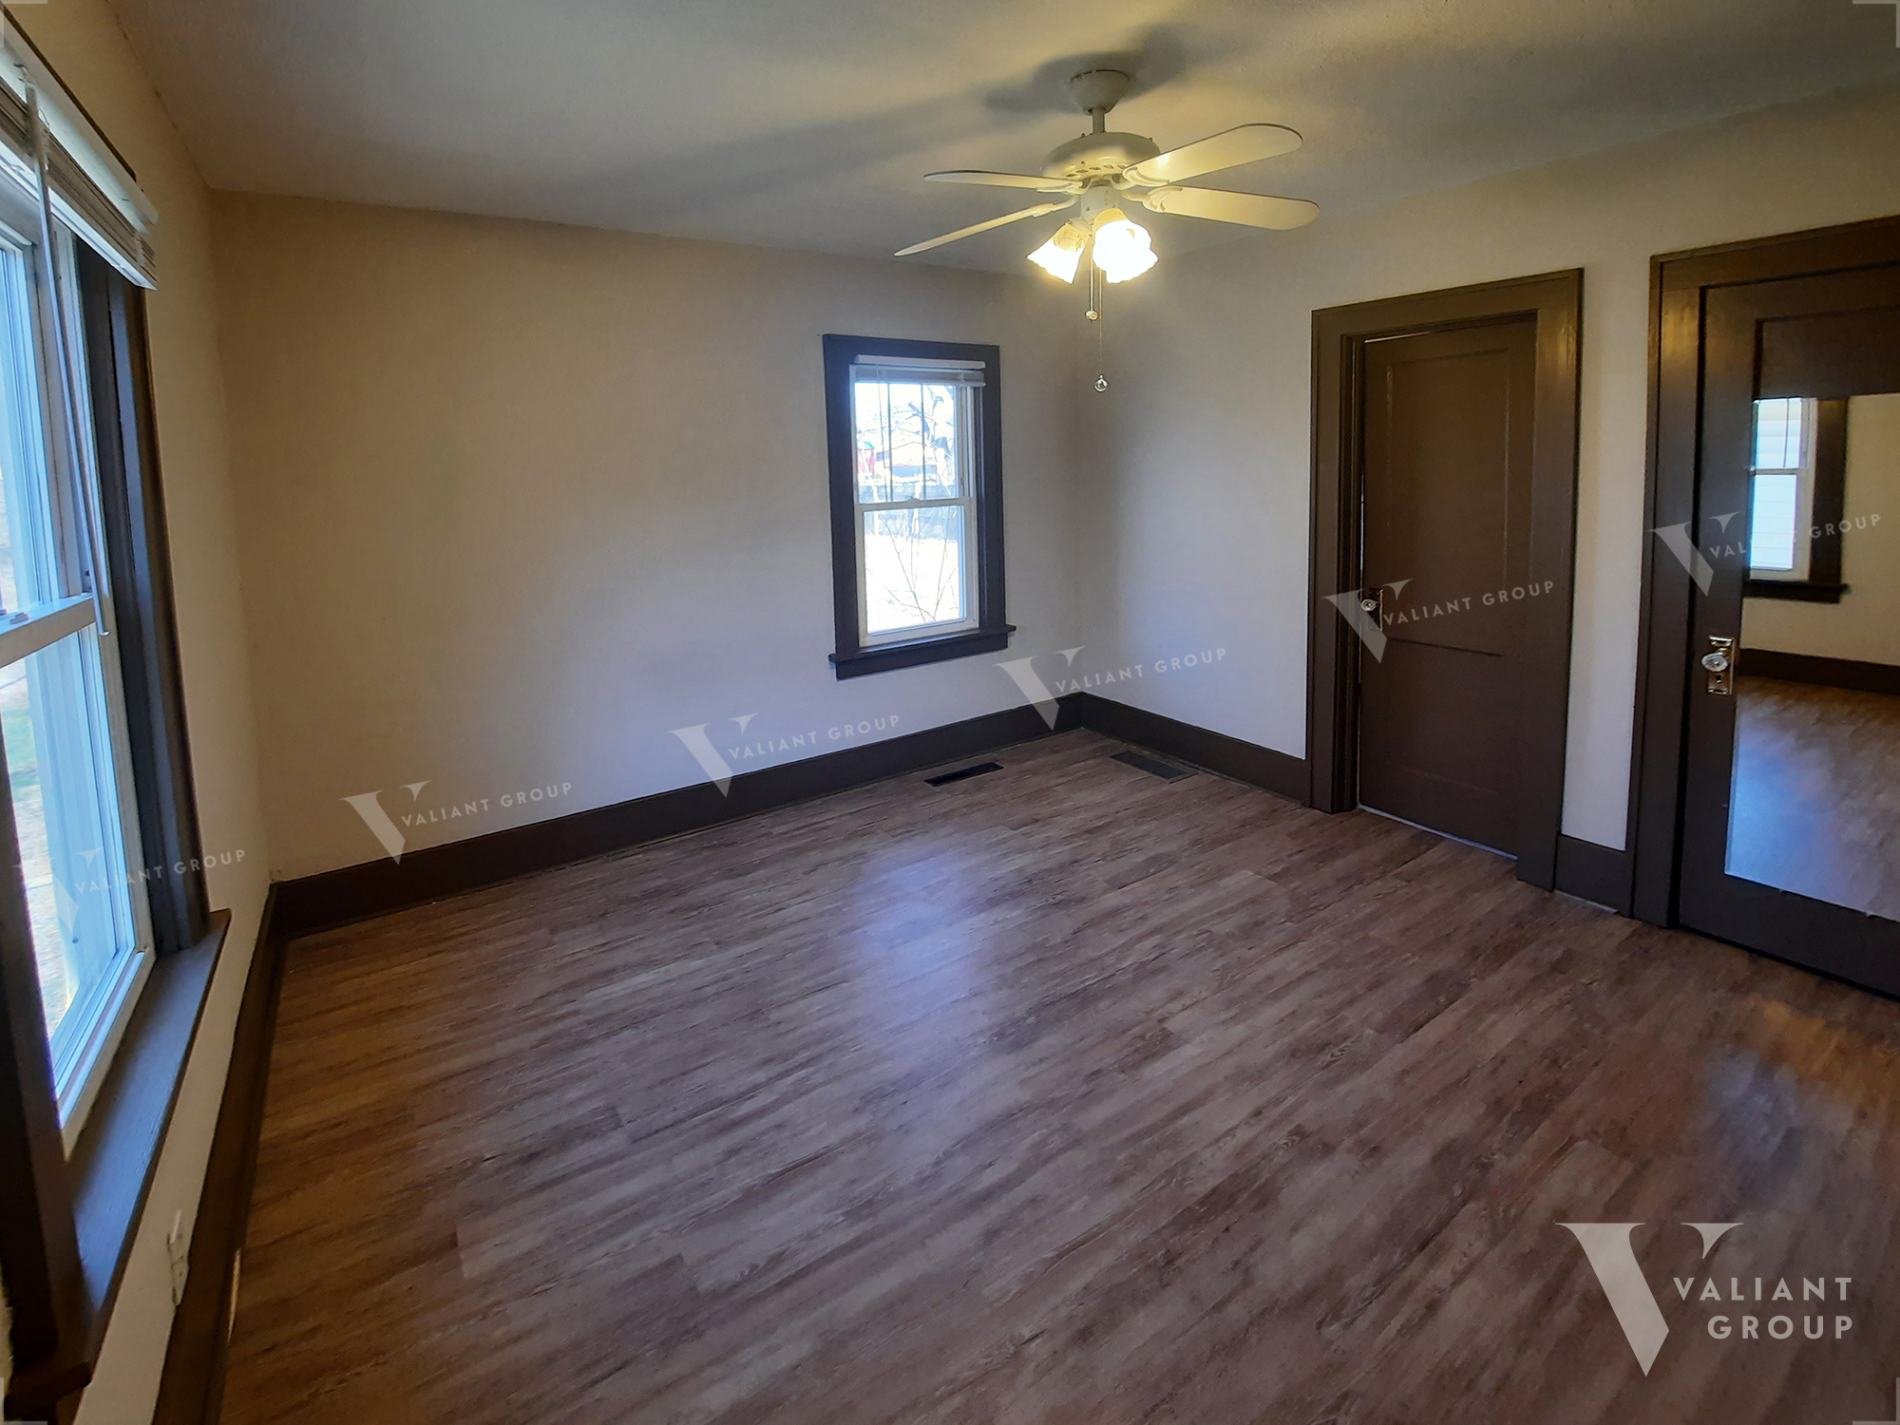 House-for-Rent-2223-W-Elm-St-Springfield-MO-10-Bedroom.jpg